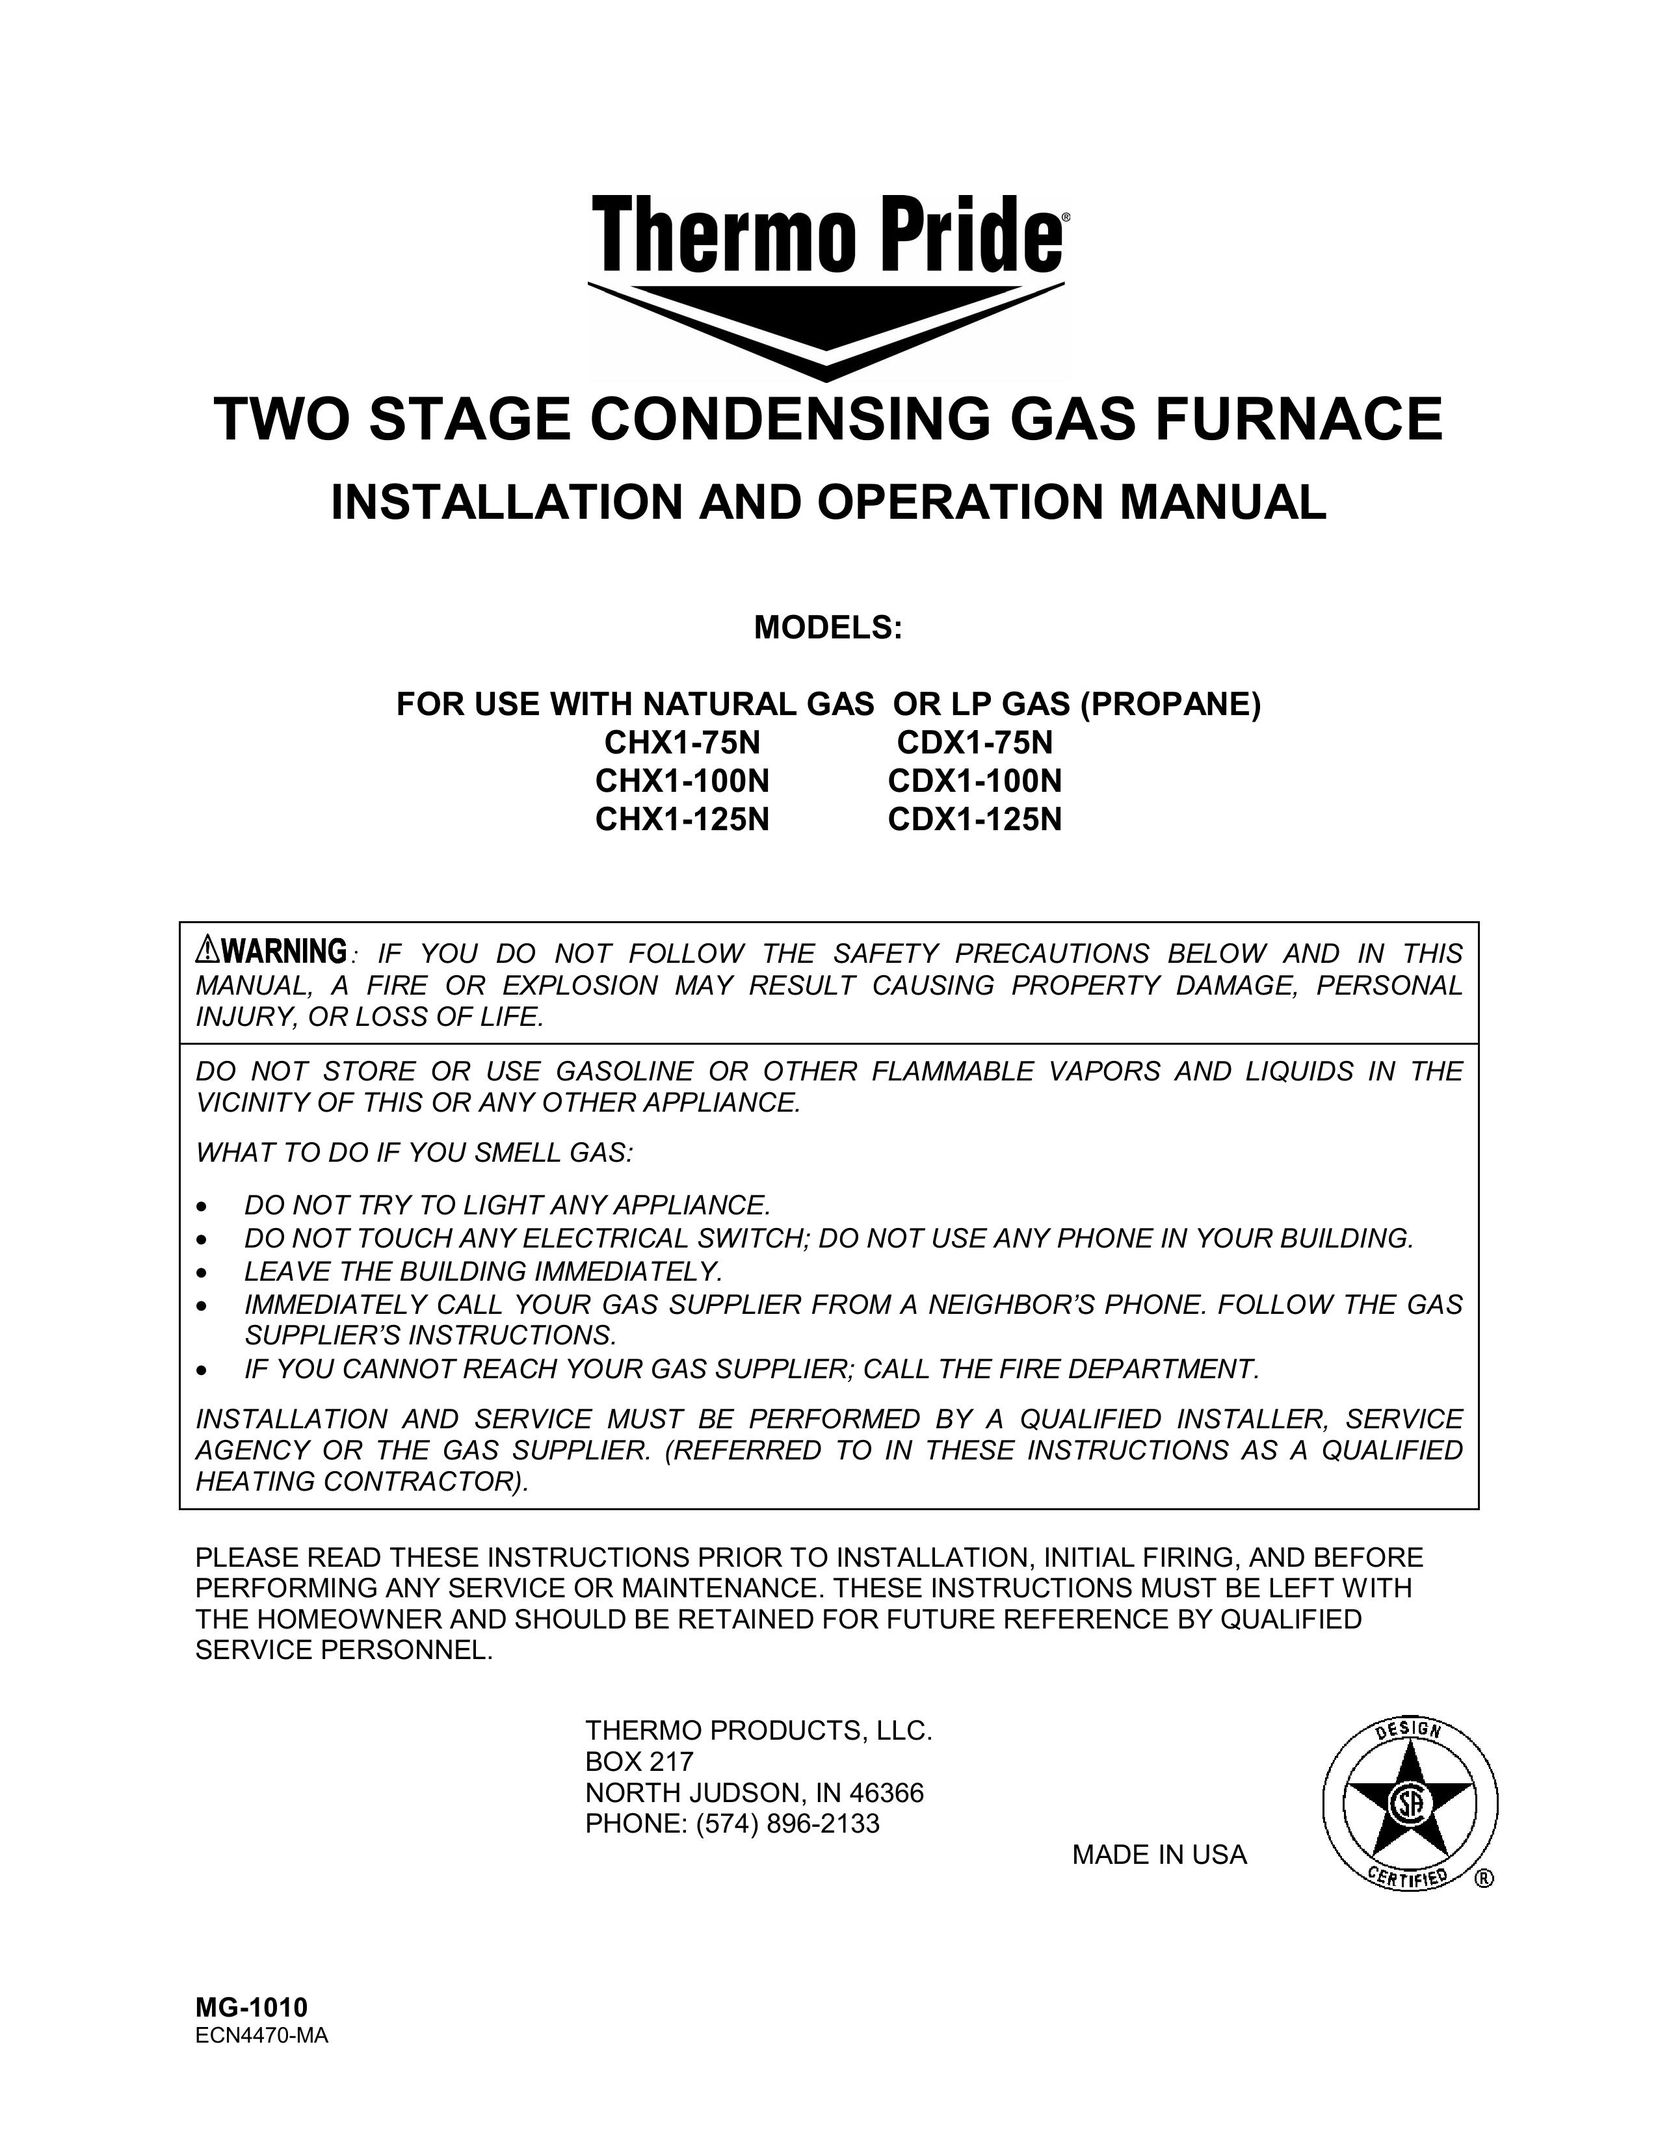 Thermo Products CDX1-125N Furnace User Manual